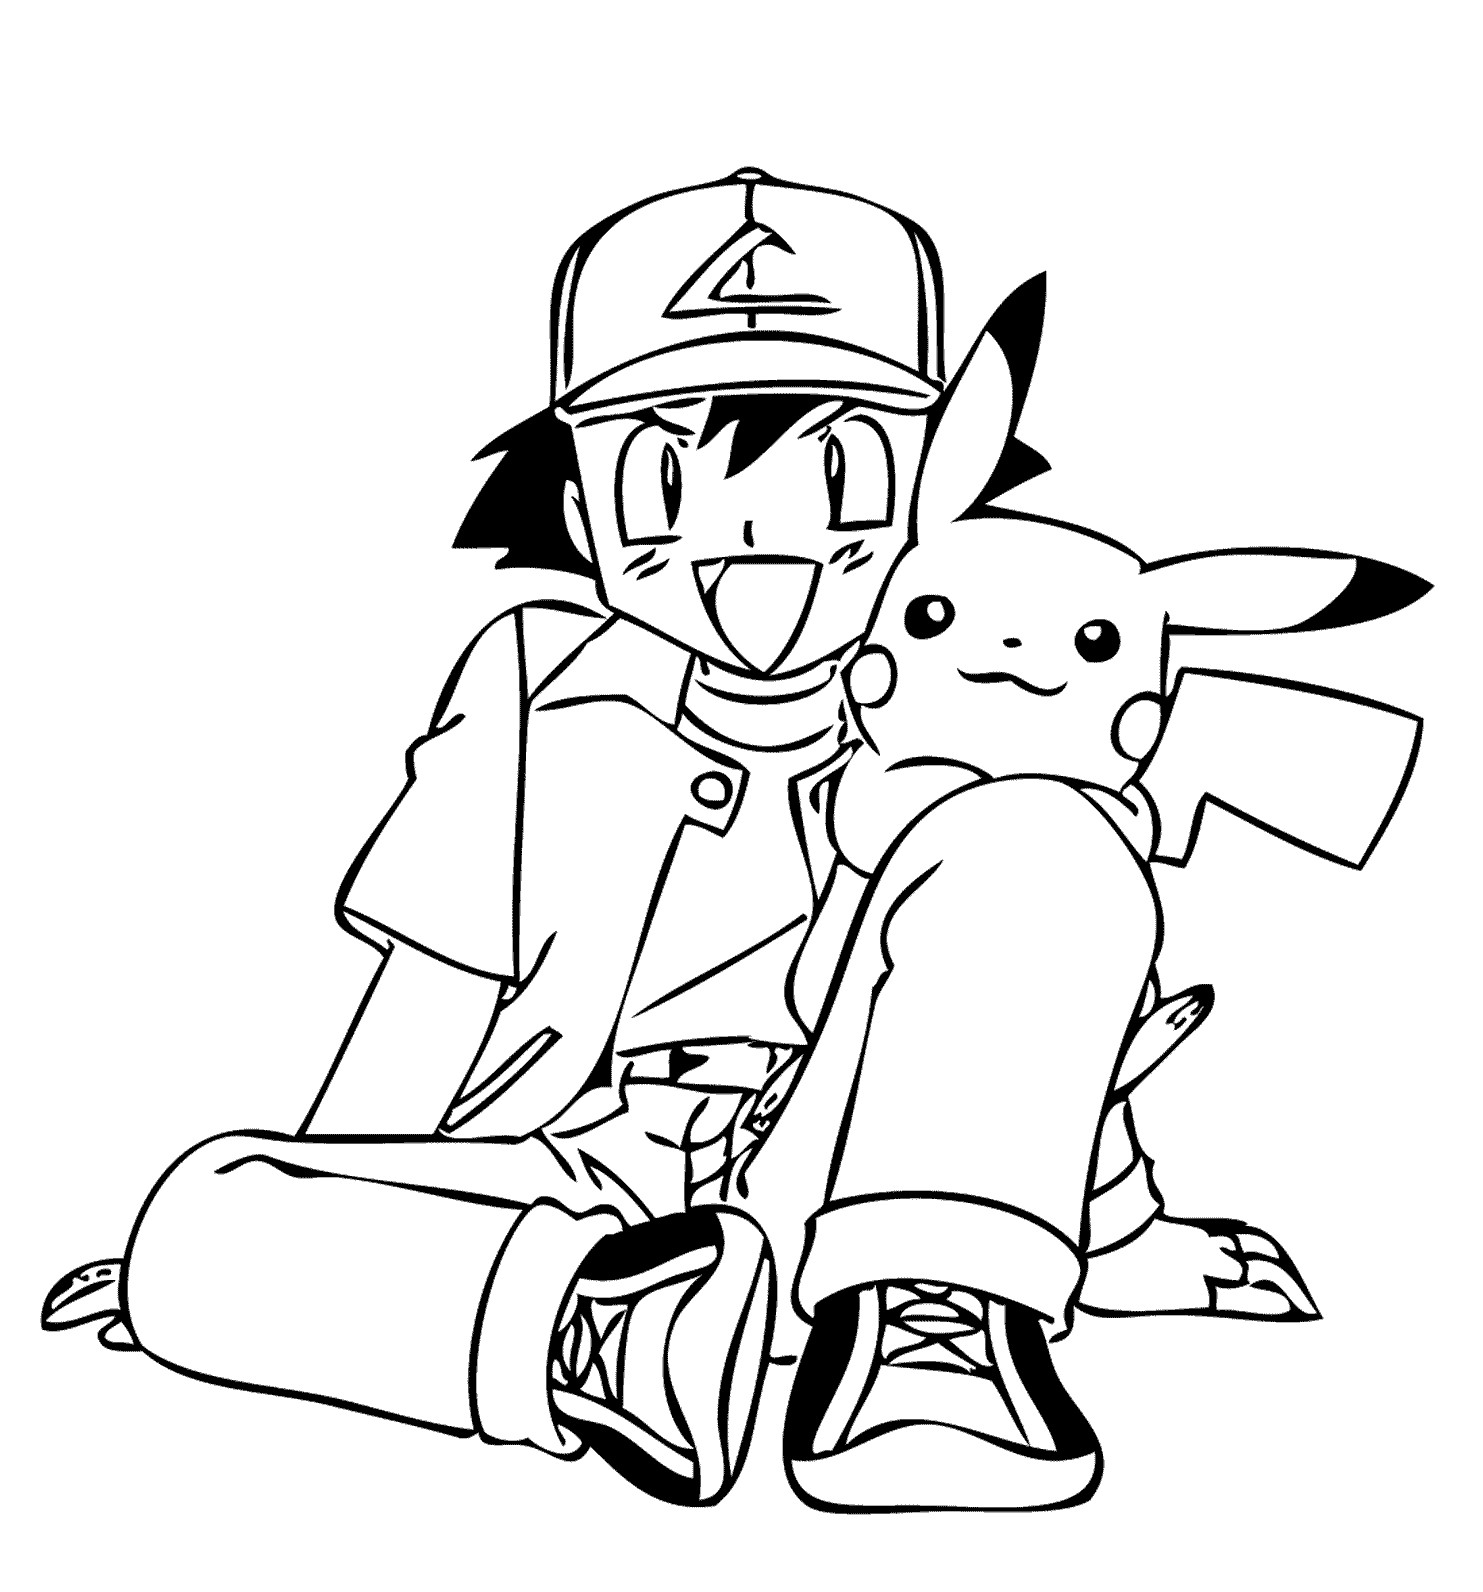 Anime Boys Coloring Pages
 Friends from Pokemon anime coloring pages for kids